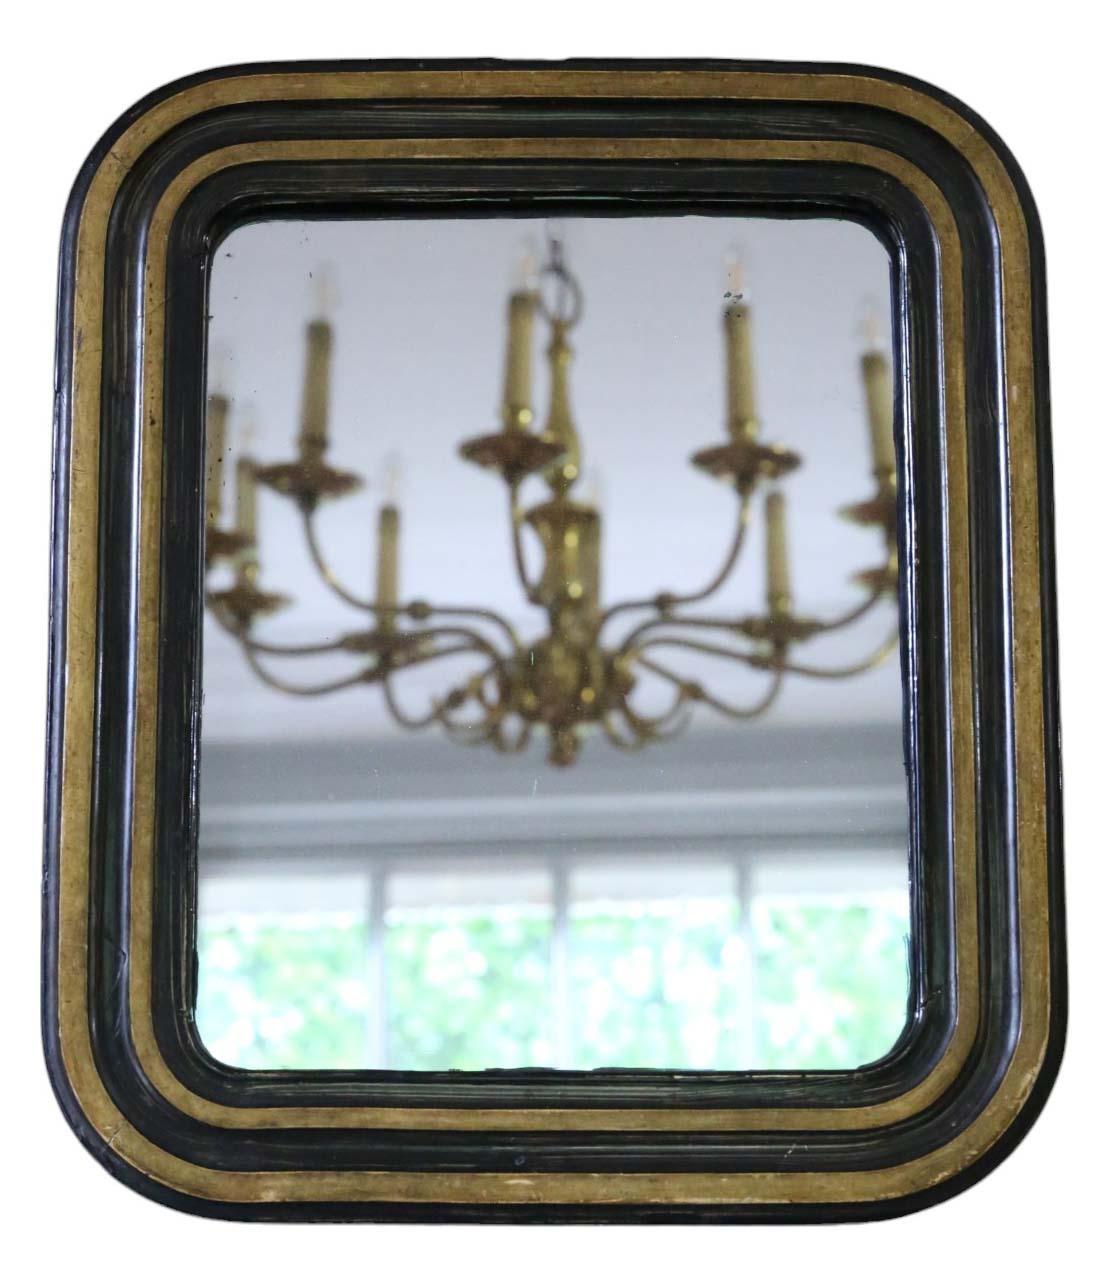 Antique small gilt and ebonized overmantle wall mirror from the 19th Century, boasting quality craftsmanship.

This mirror captivates with its modest proportions, adding character to any suitable space. The frame exhibits sturdy construction, free